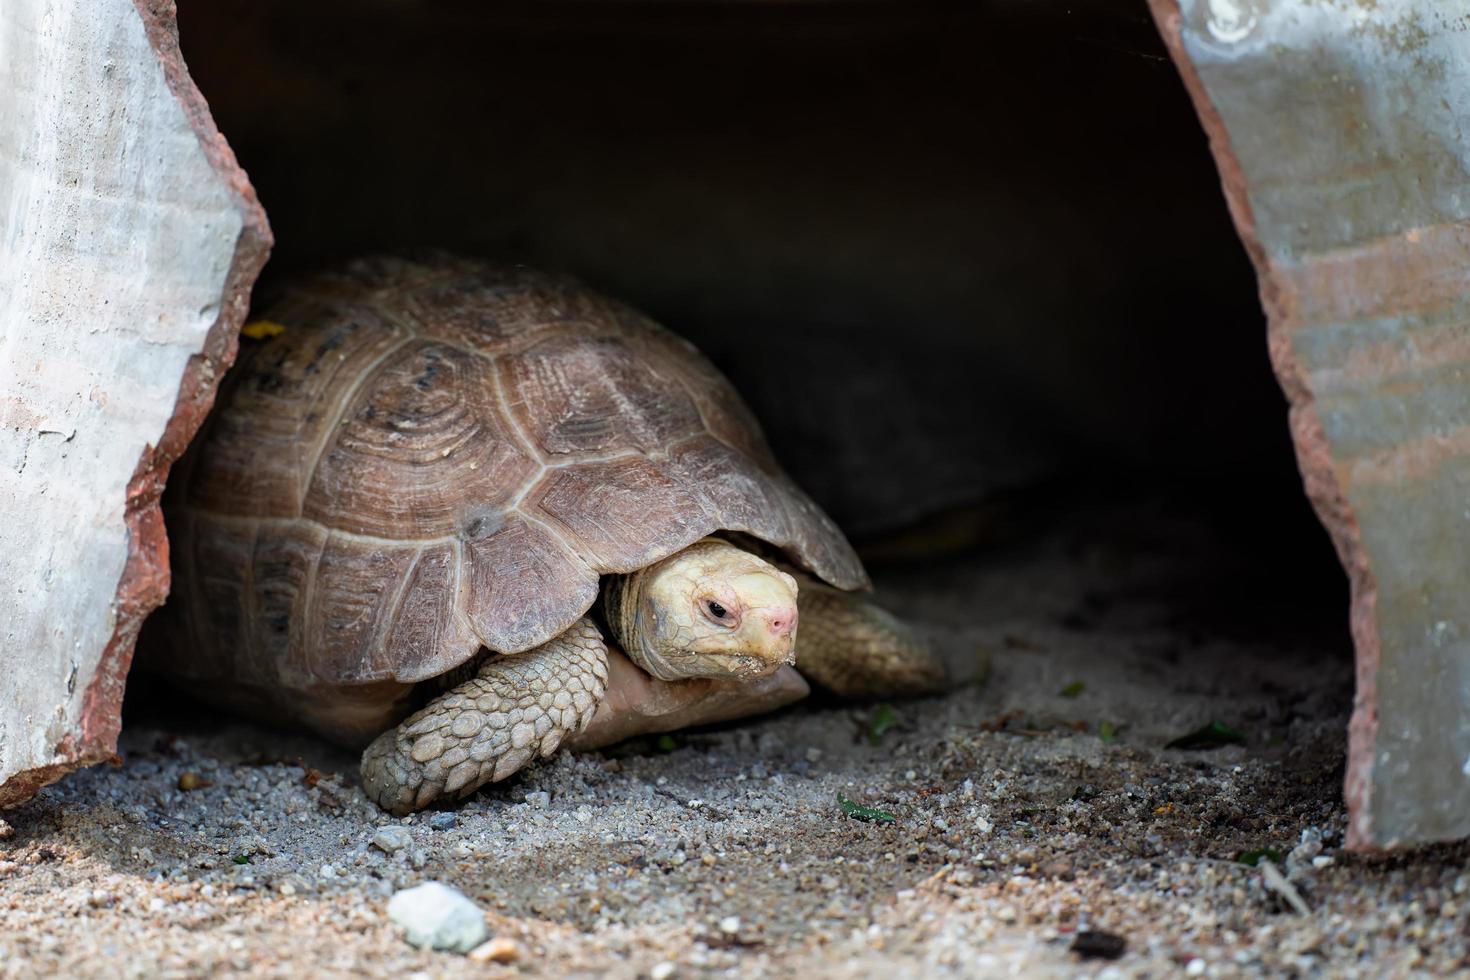 Geochelone sulcata , Sulcata tortoise, African spurred tortoise walking on the ground and looking at camera, Animal conservation and protecting ecosystems concept. photo